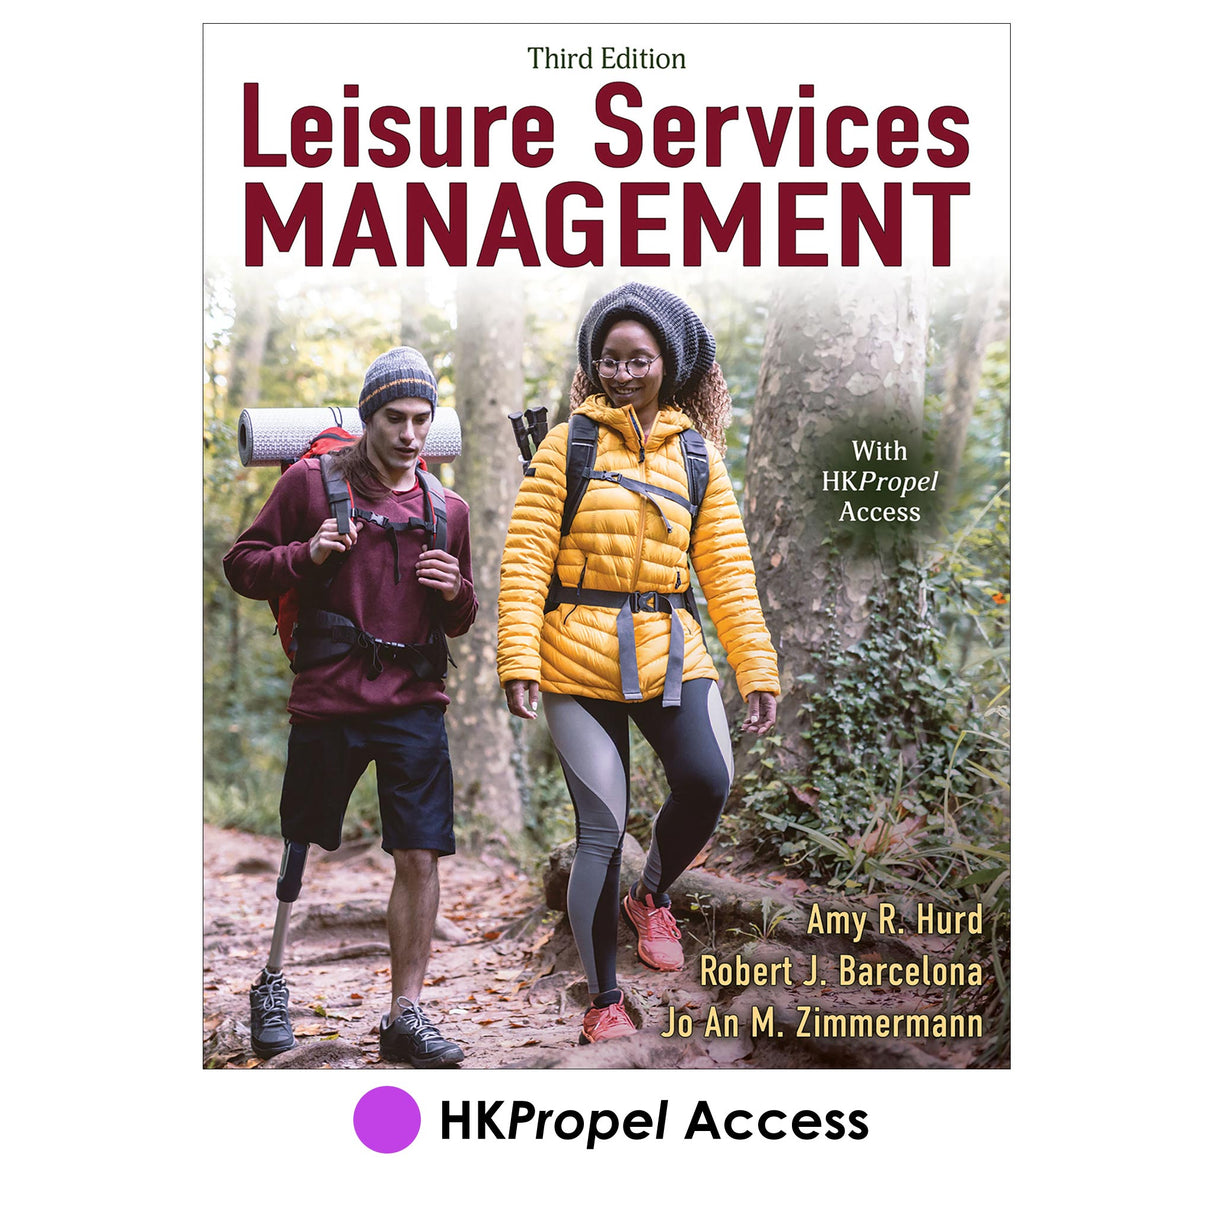 Leisure Services Management 3rd Edition HKPropel Access